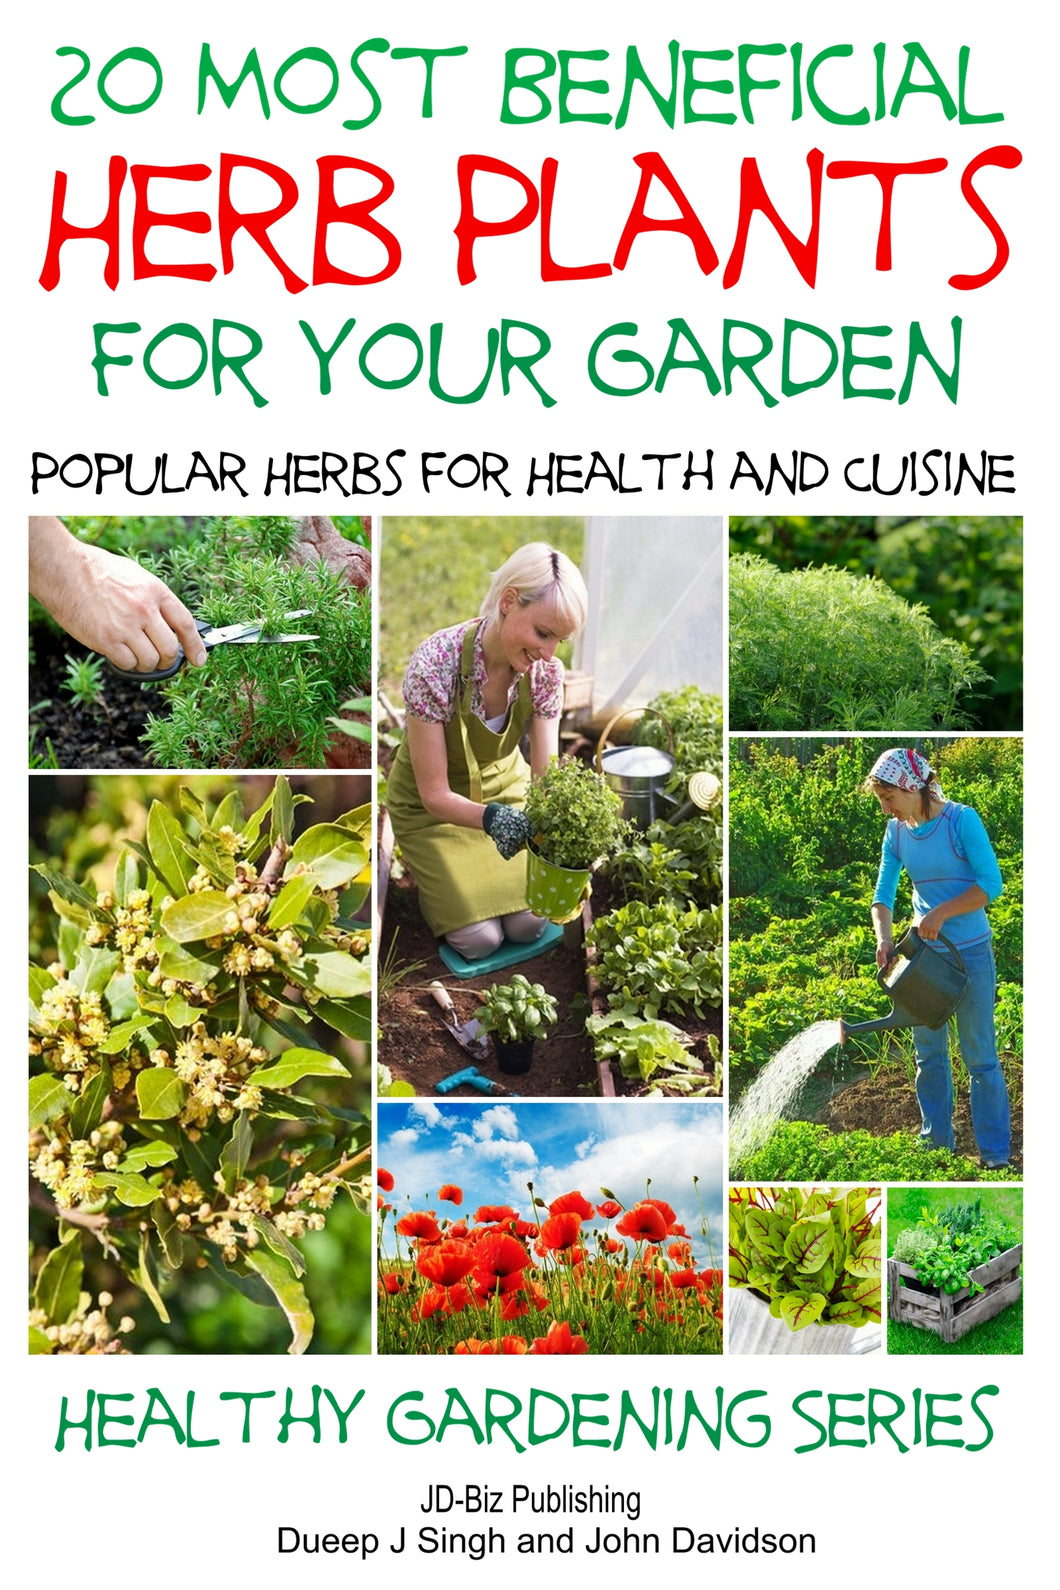 20 Most Beneficial Herb Plants For Your Garden